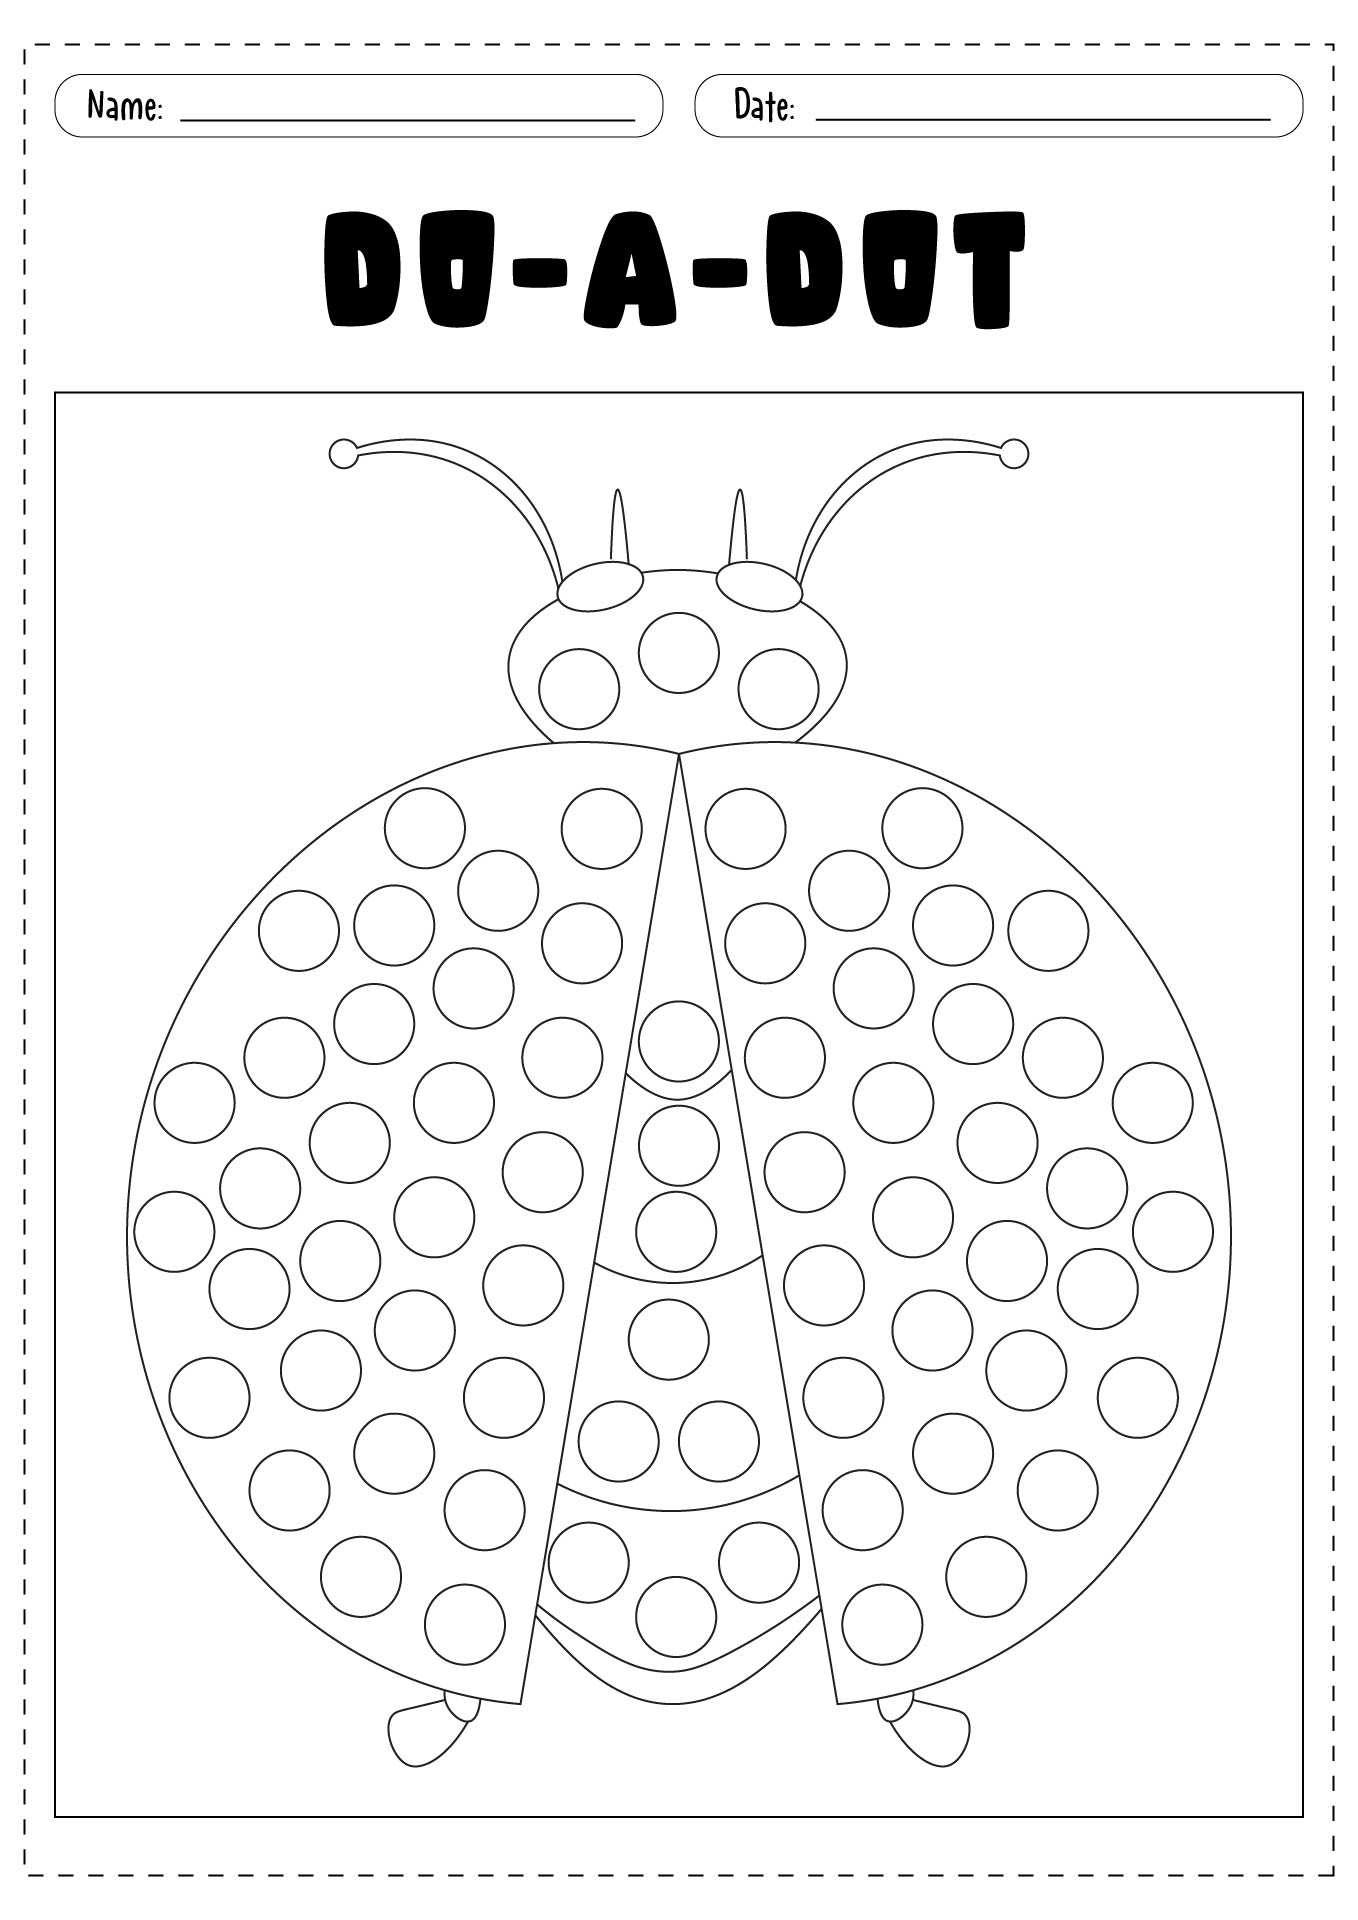 8 Best Images of Connect The Dots Worksheets For Grade 1 - Connect the